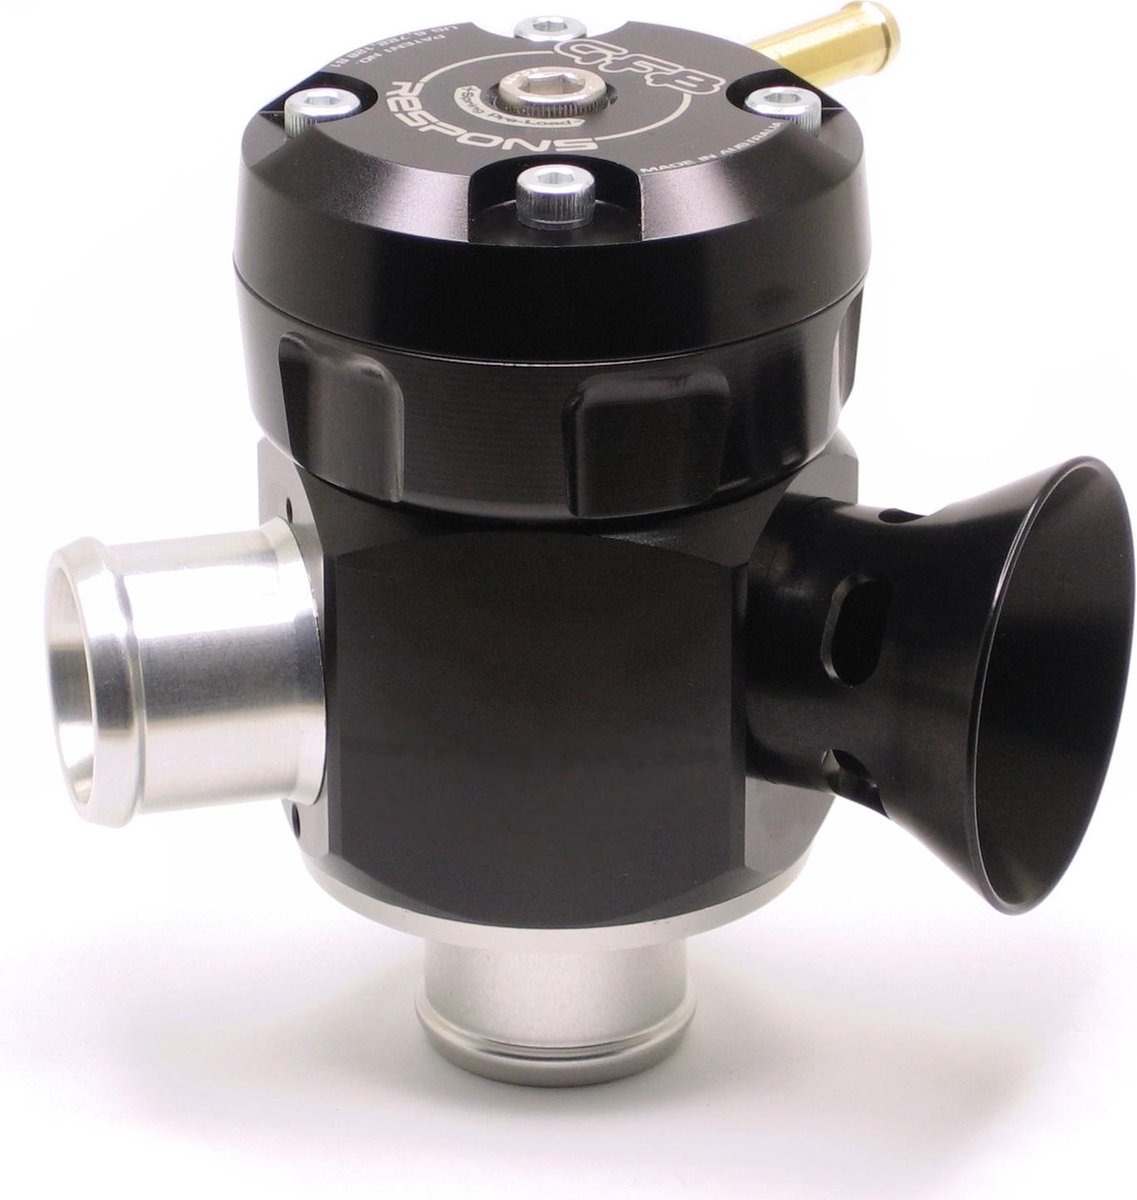 GFB T9025, Respons TMS Universal (25mm inlet- 25mm outlet) Blow off valve or BOV with GFB TMS advantage.